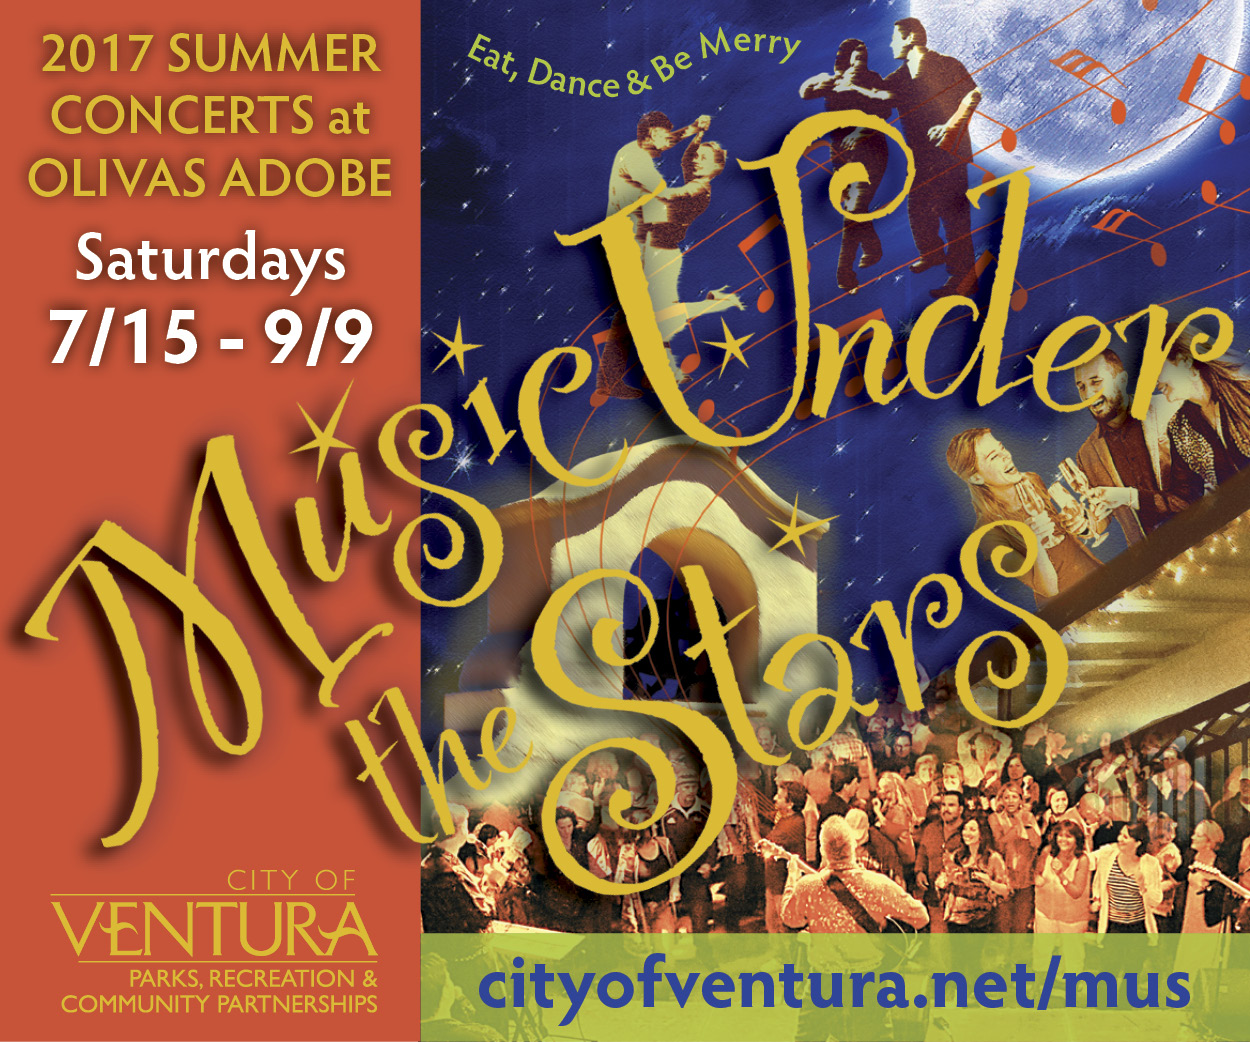 Music Under the Stars Concert Series presented by City of Ventura Parks